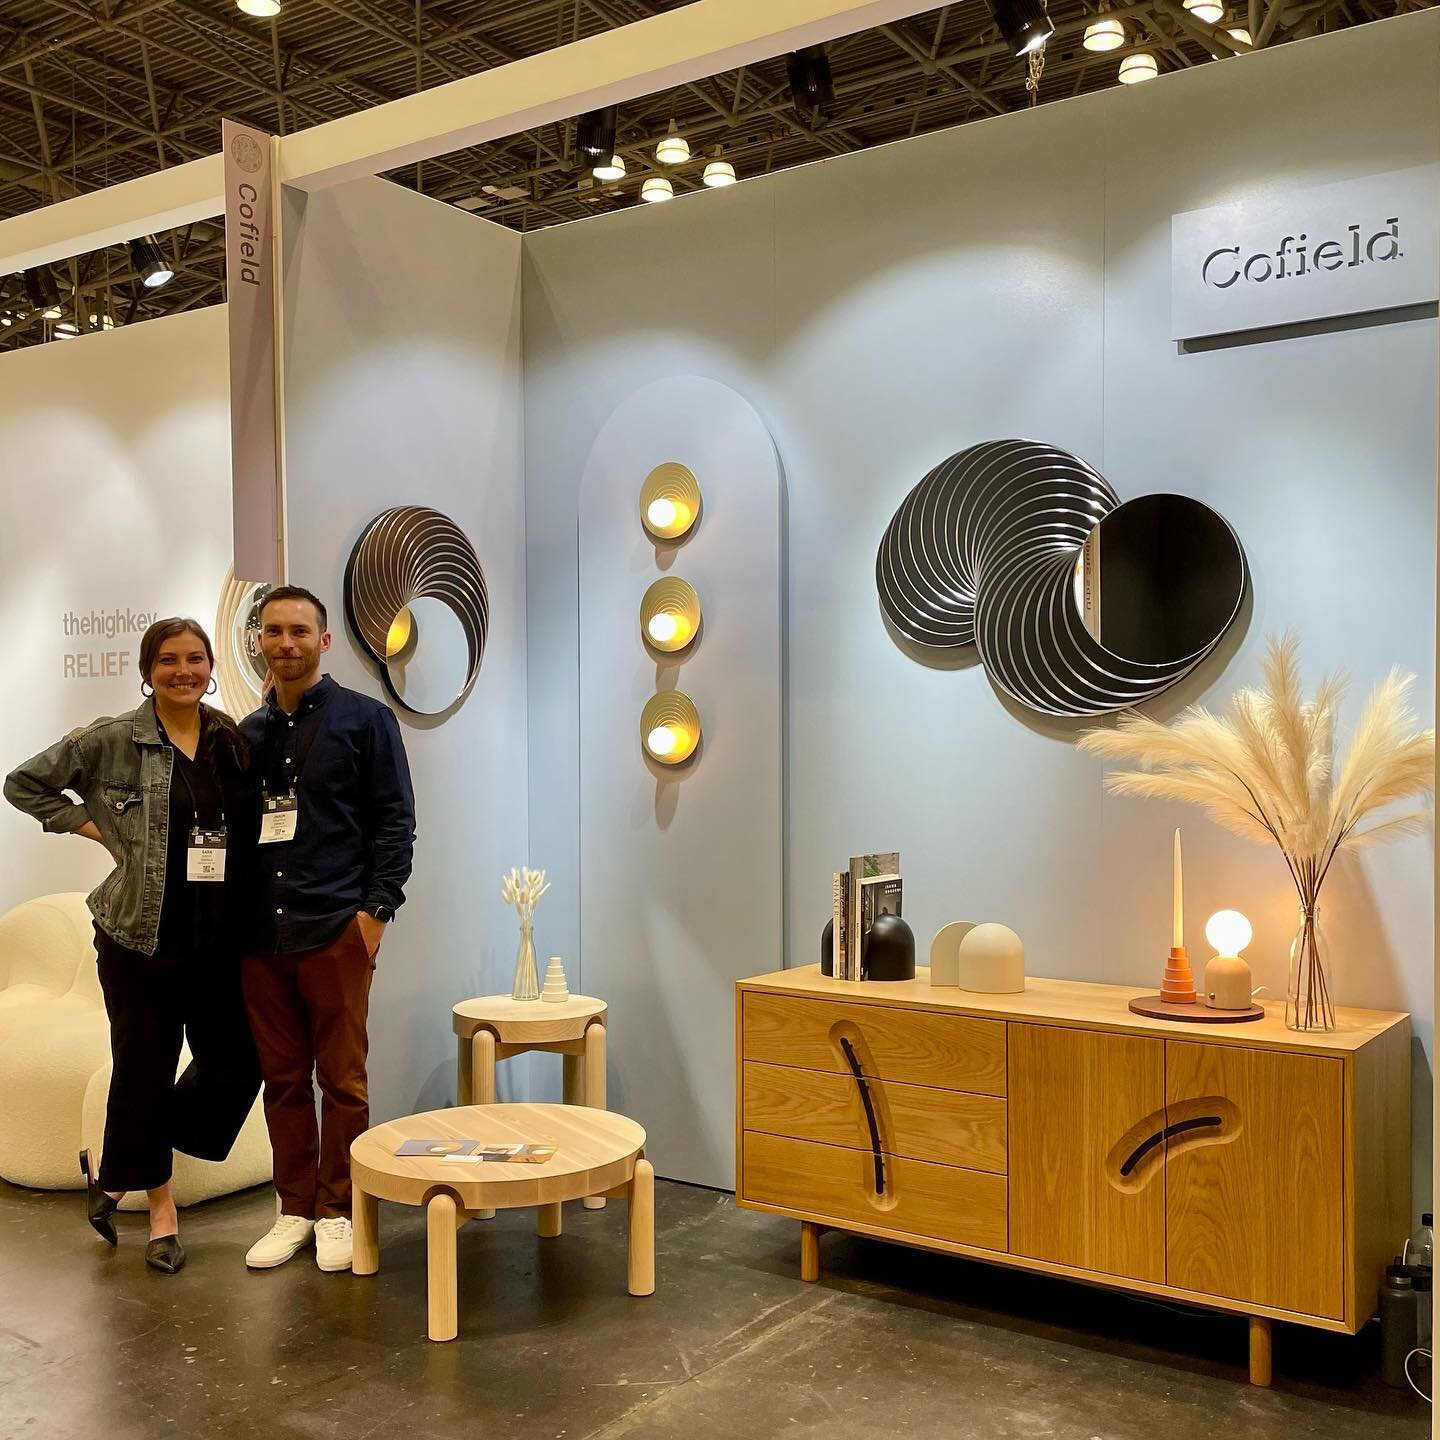 That&rsquo;s a wrap! Thanks again to @wanteddesign + @icff_official and all who came out. We had awesome neighbors and met some great people!